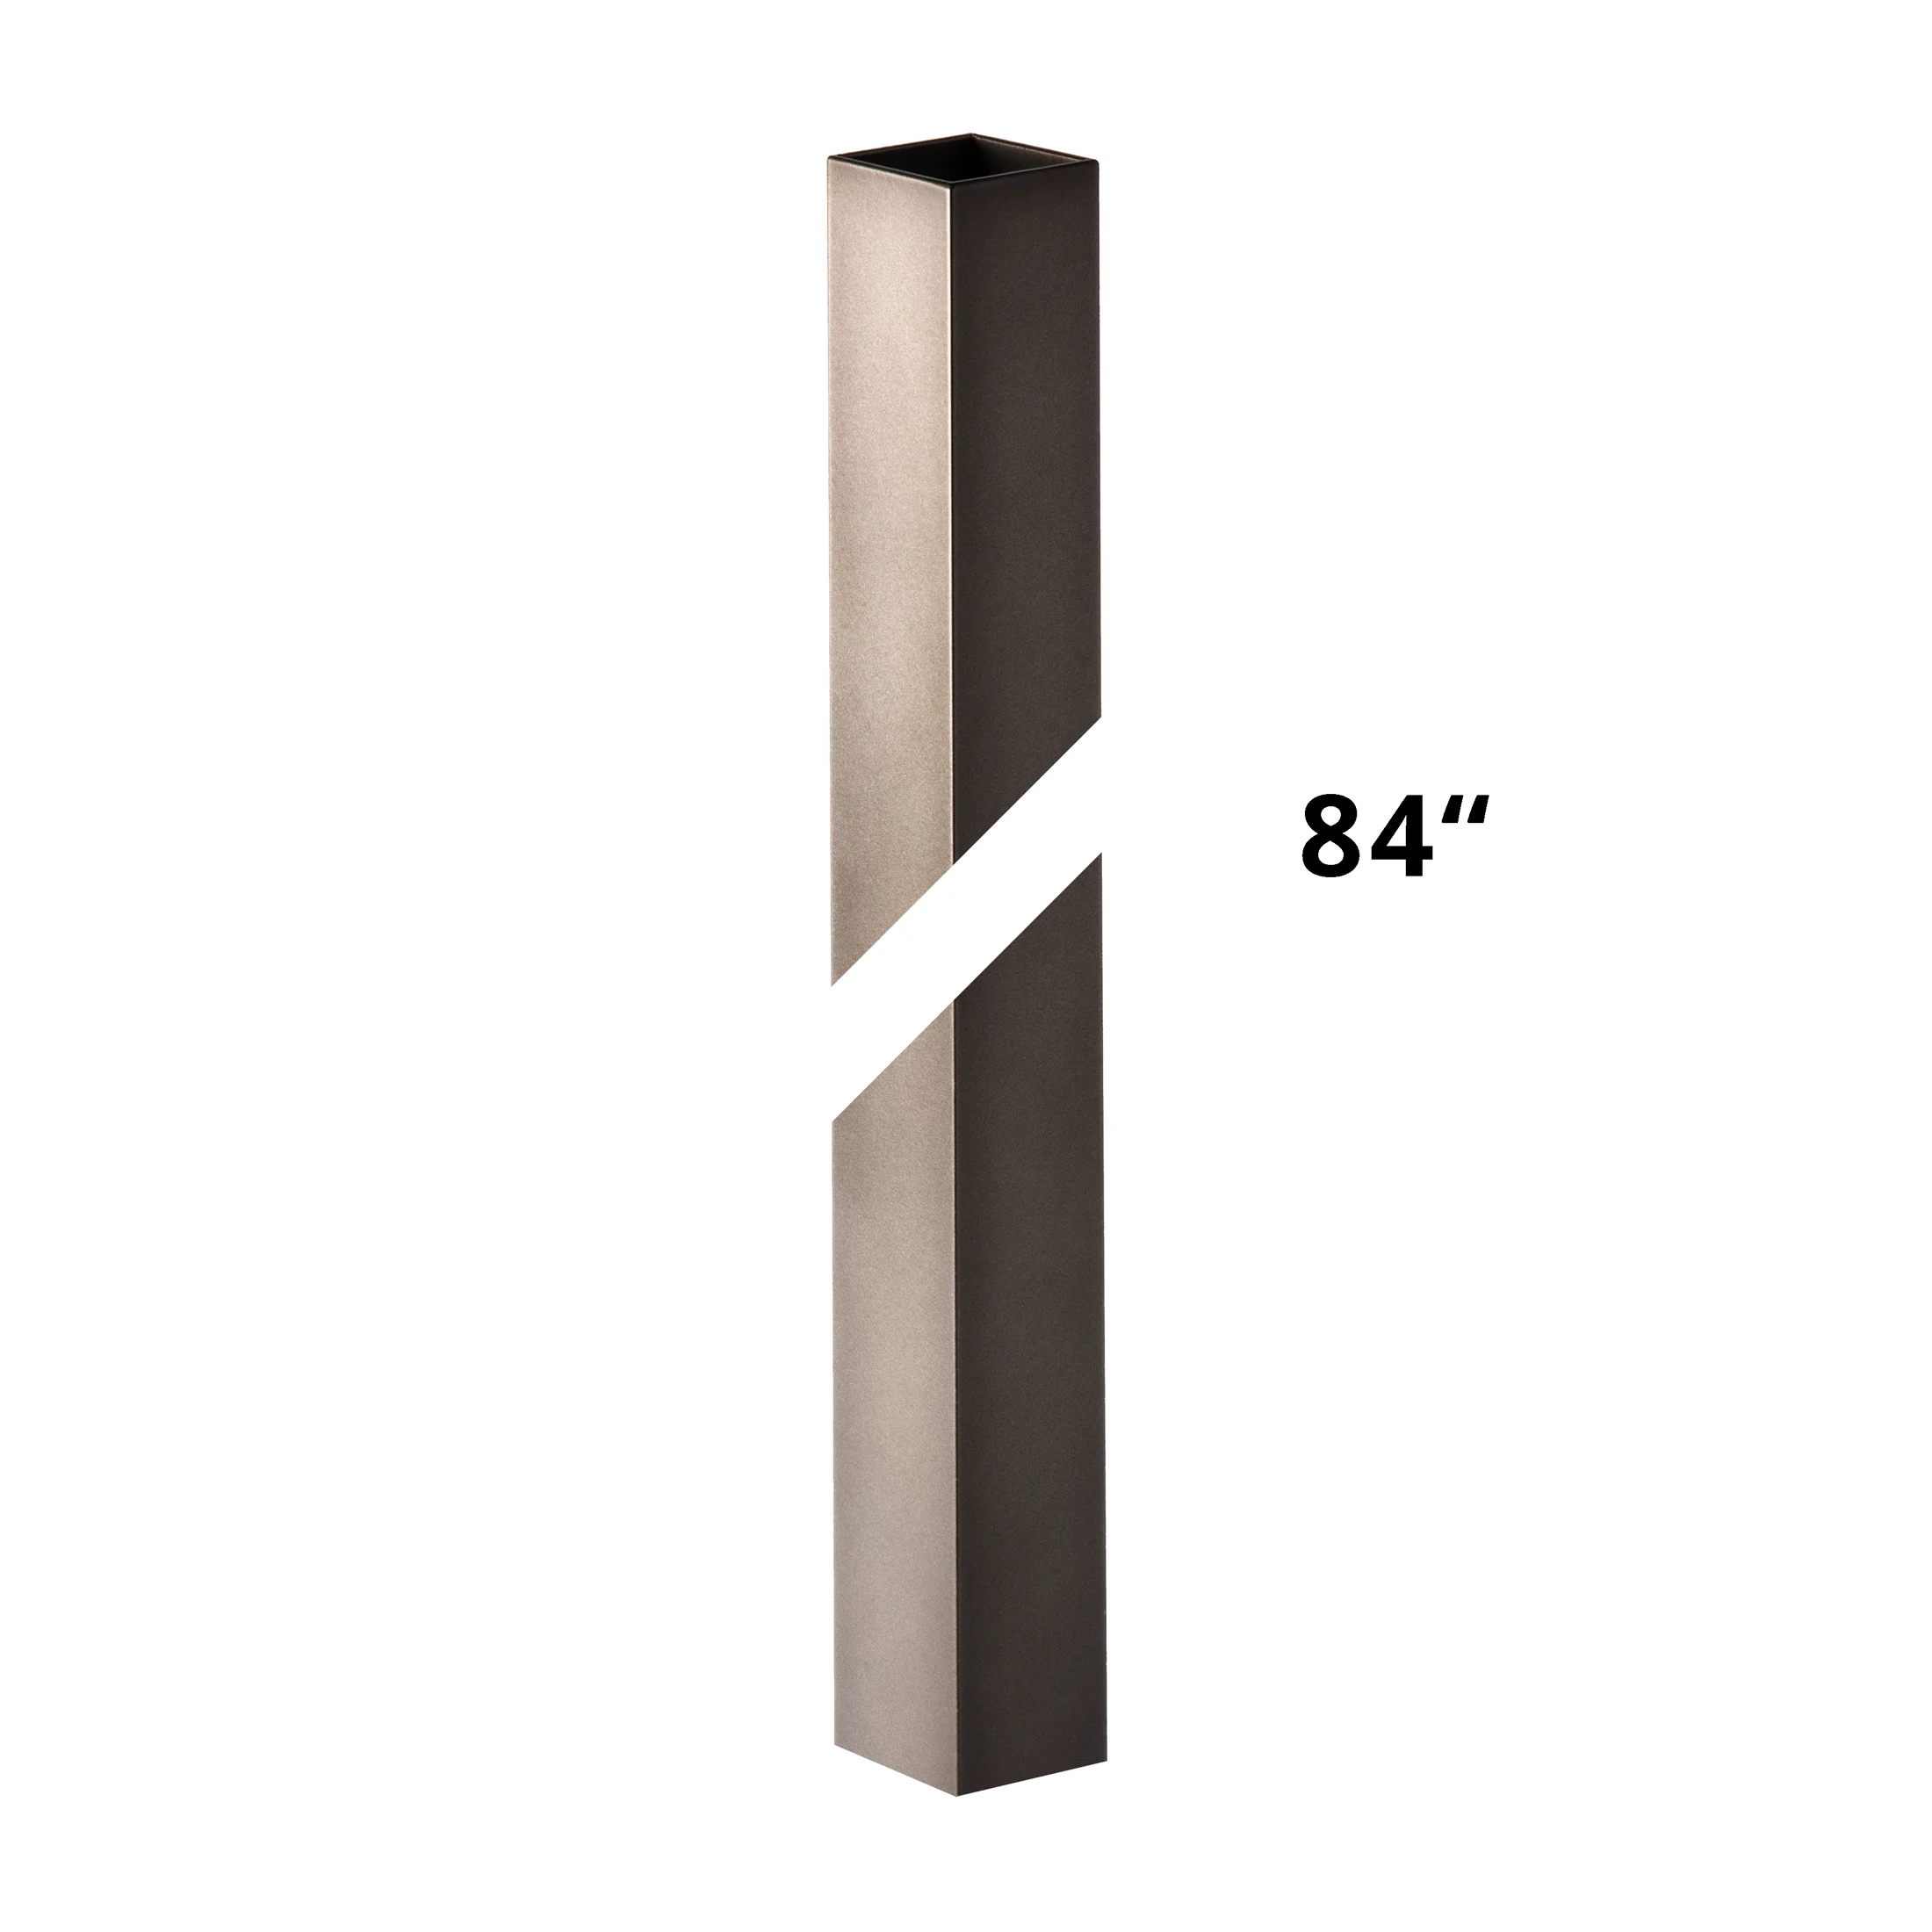 7' Square Outdoor Post